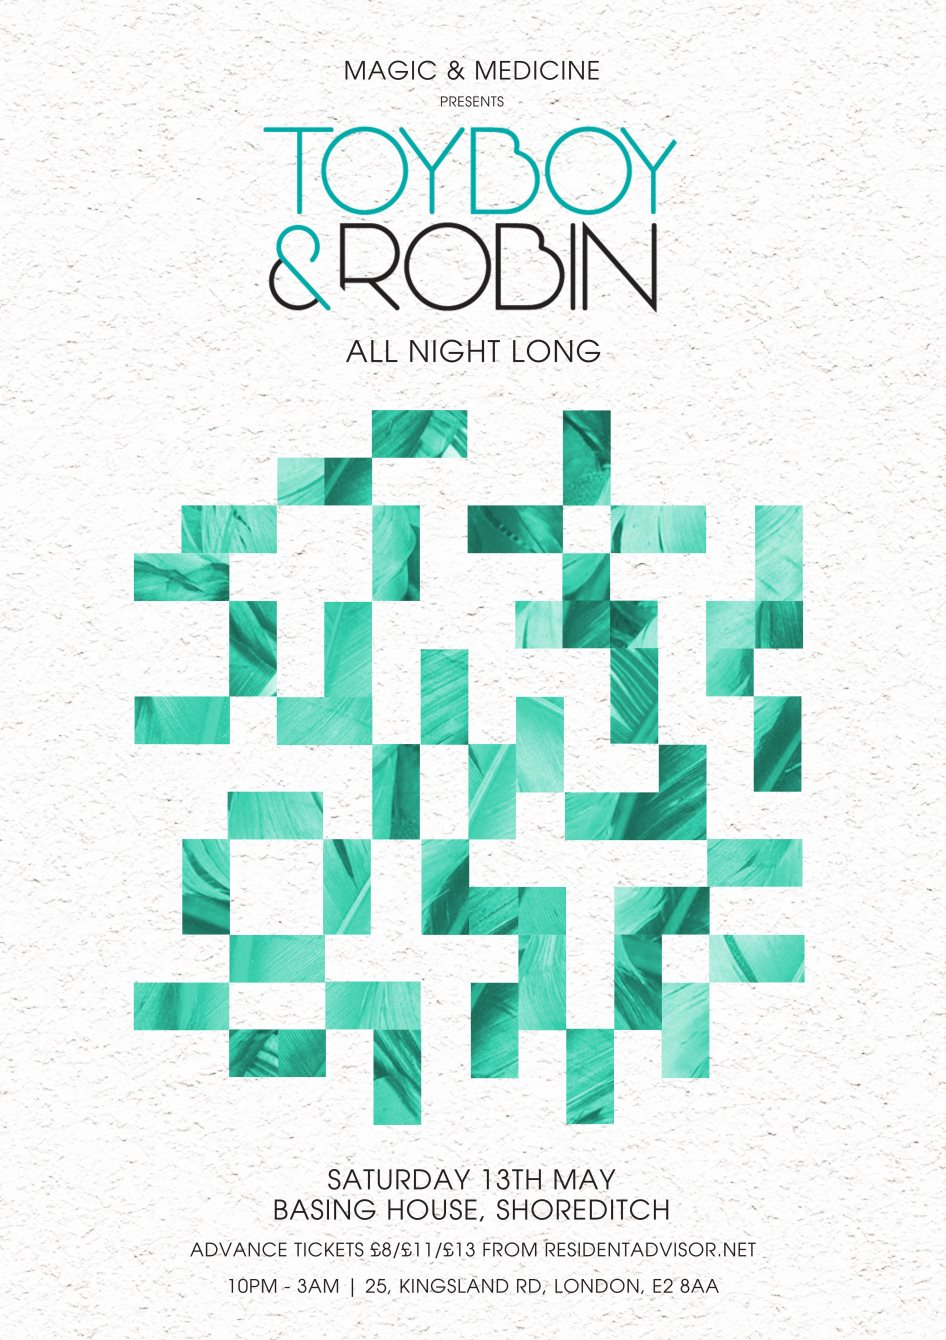 Toyboy & Robin All Night Long - Flyer front